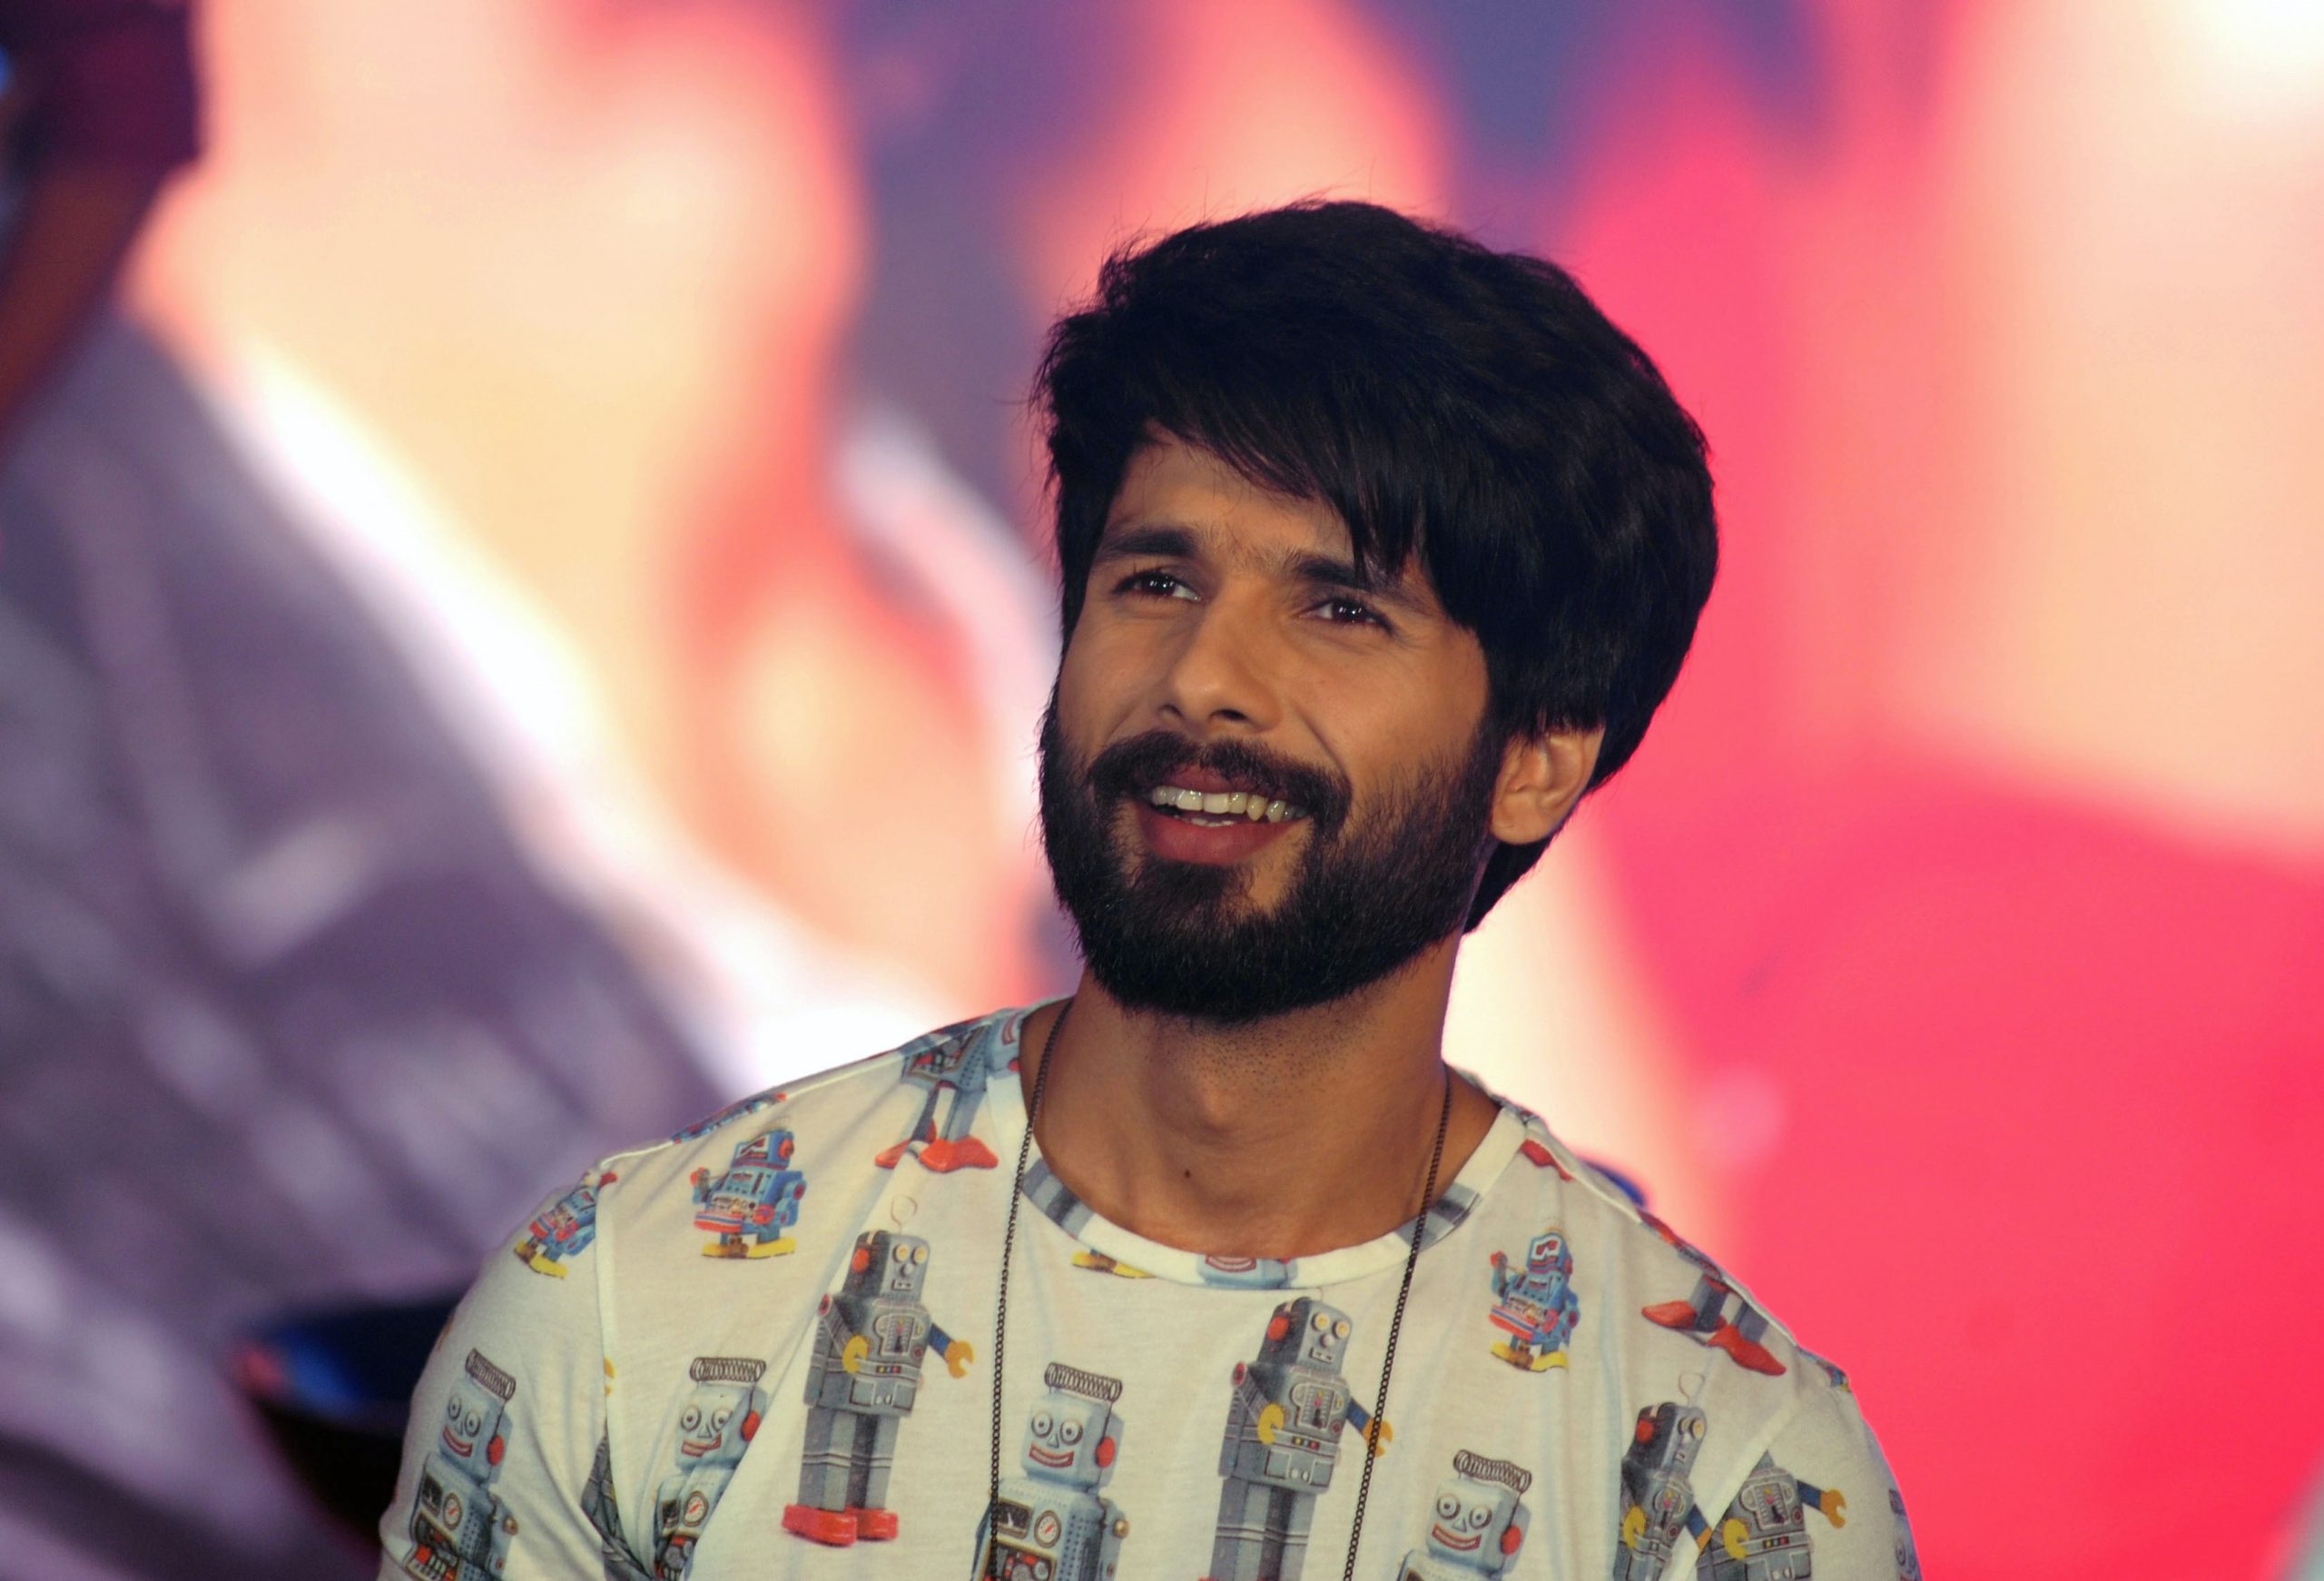 Shahid Kapoor's streaming show Sunny is a reworked version of Raj & DK's  Farzi - Indiaweekly